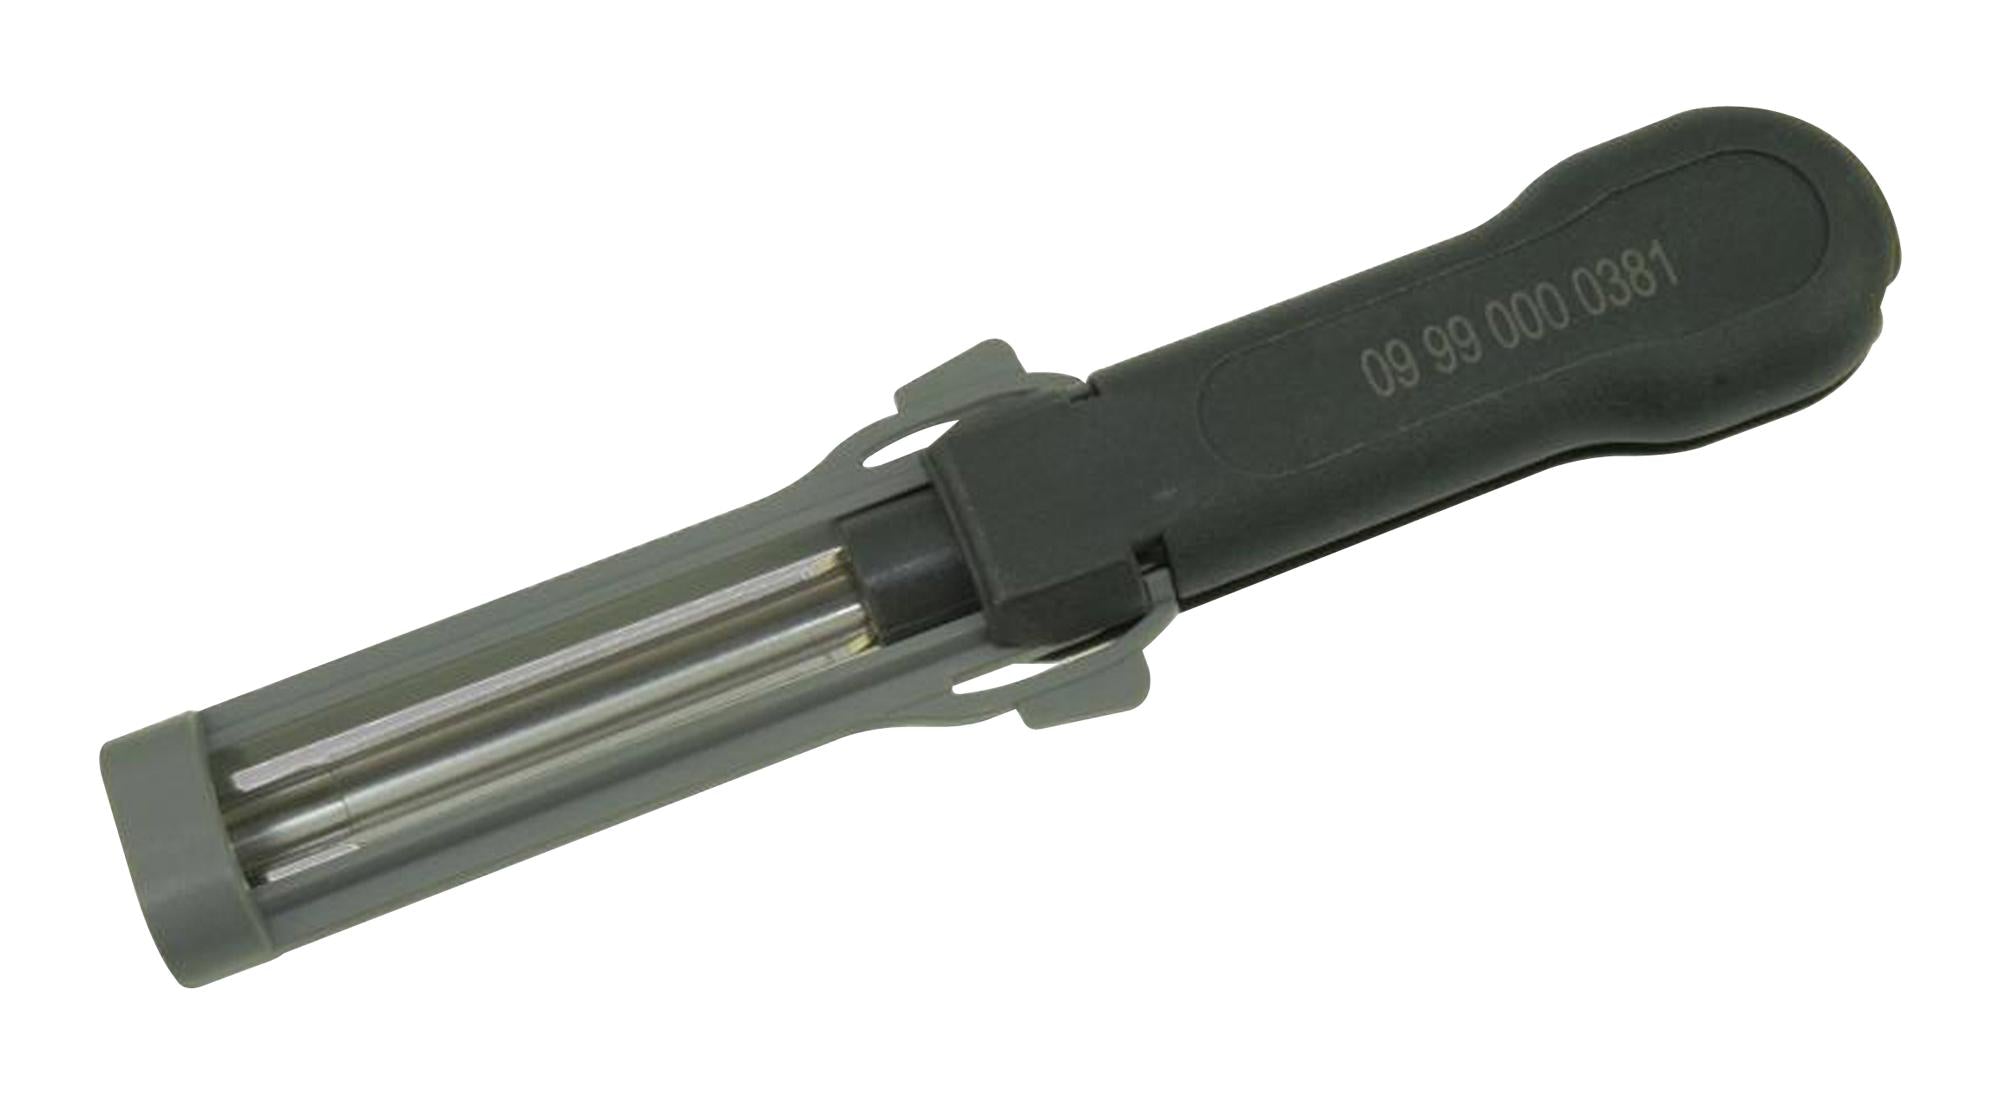 09990000381 REMOVAL TOOL, CRIMP CONTACT HARTING